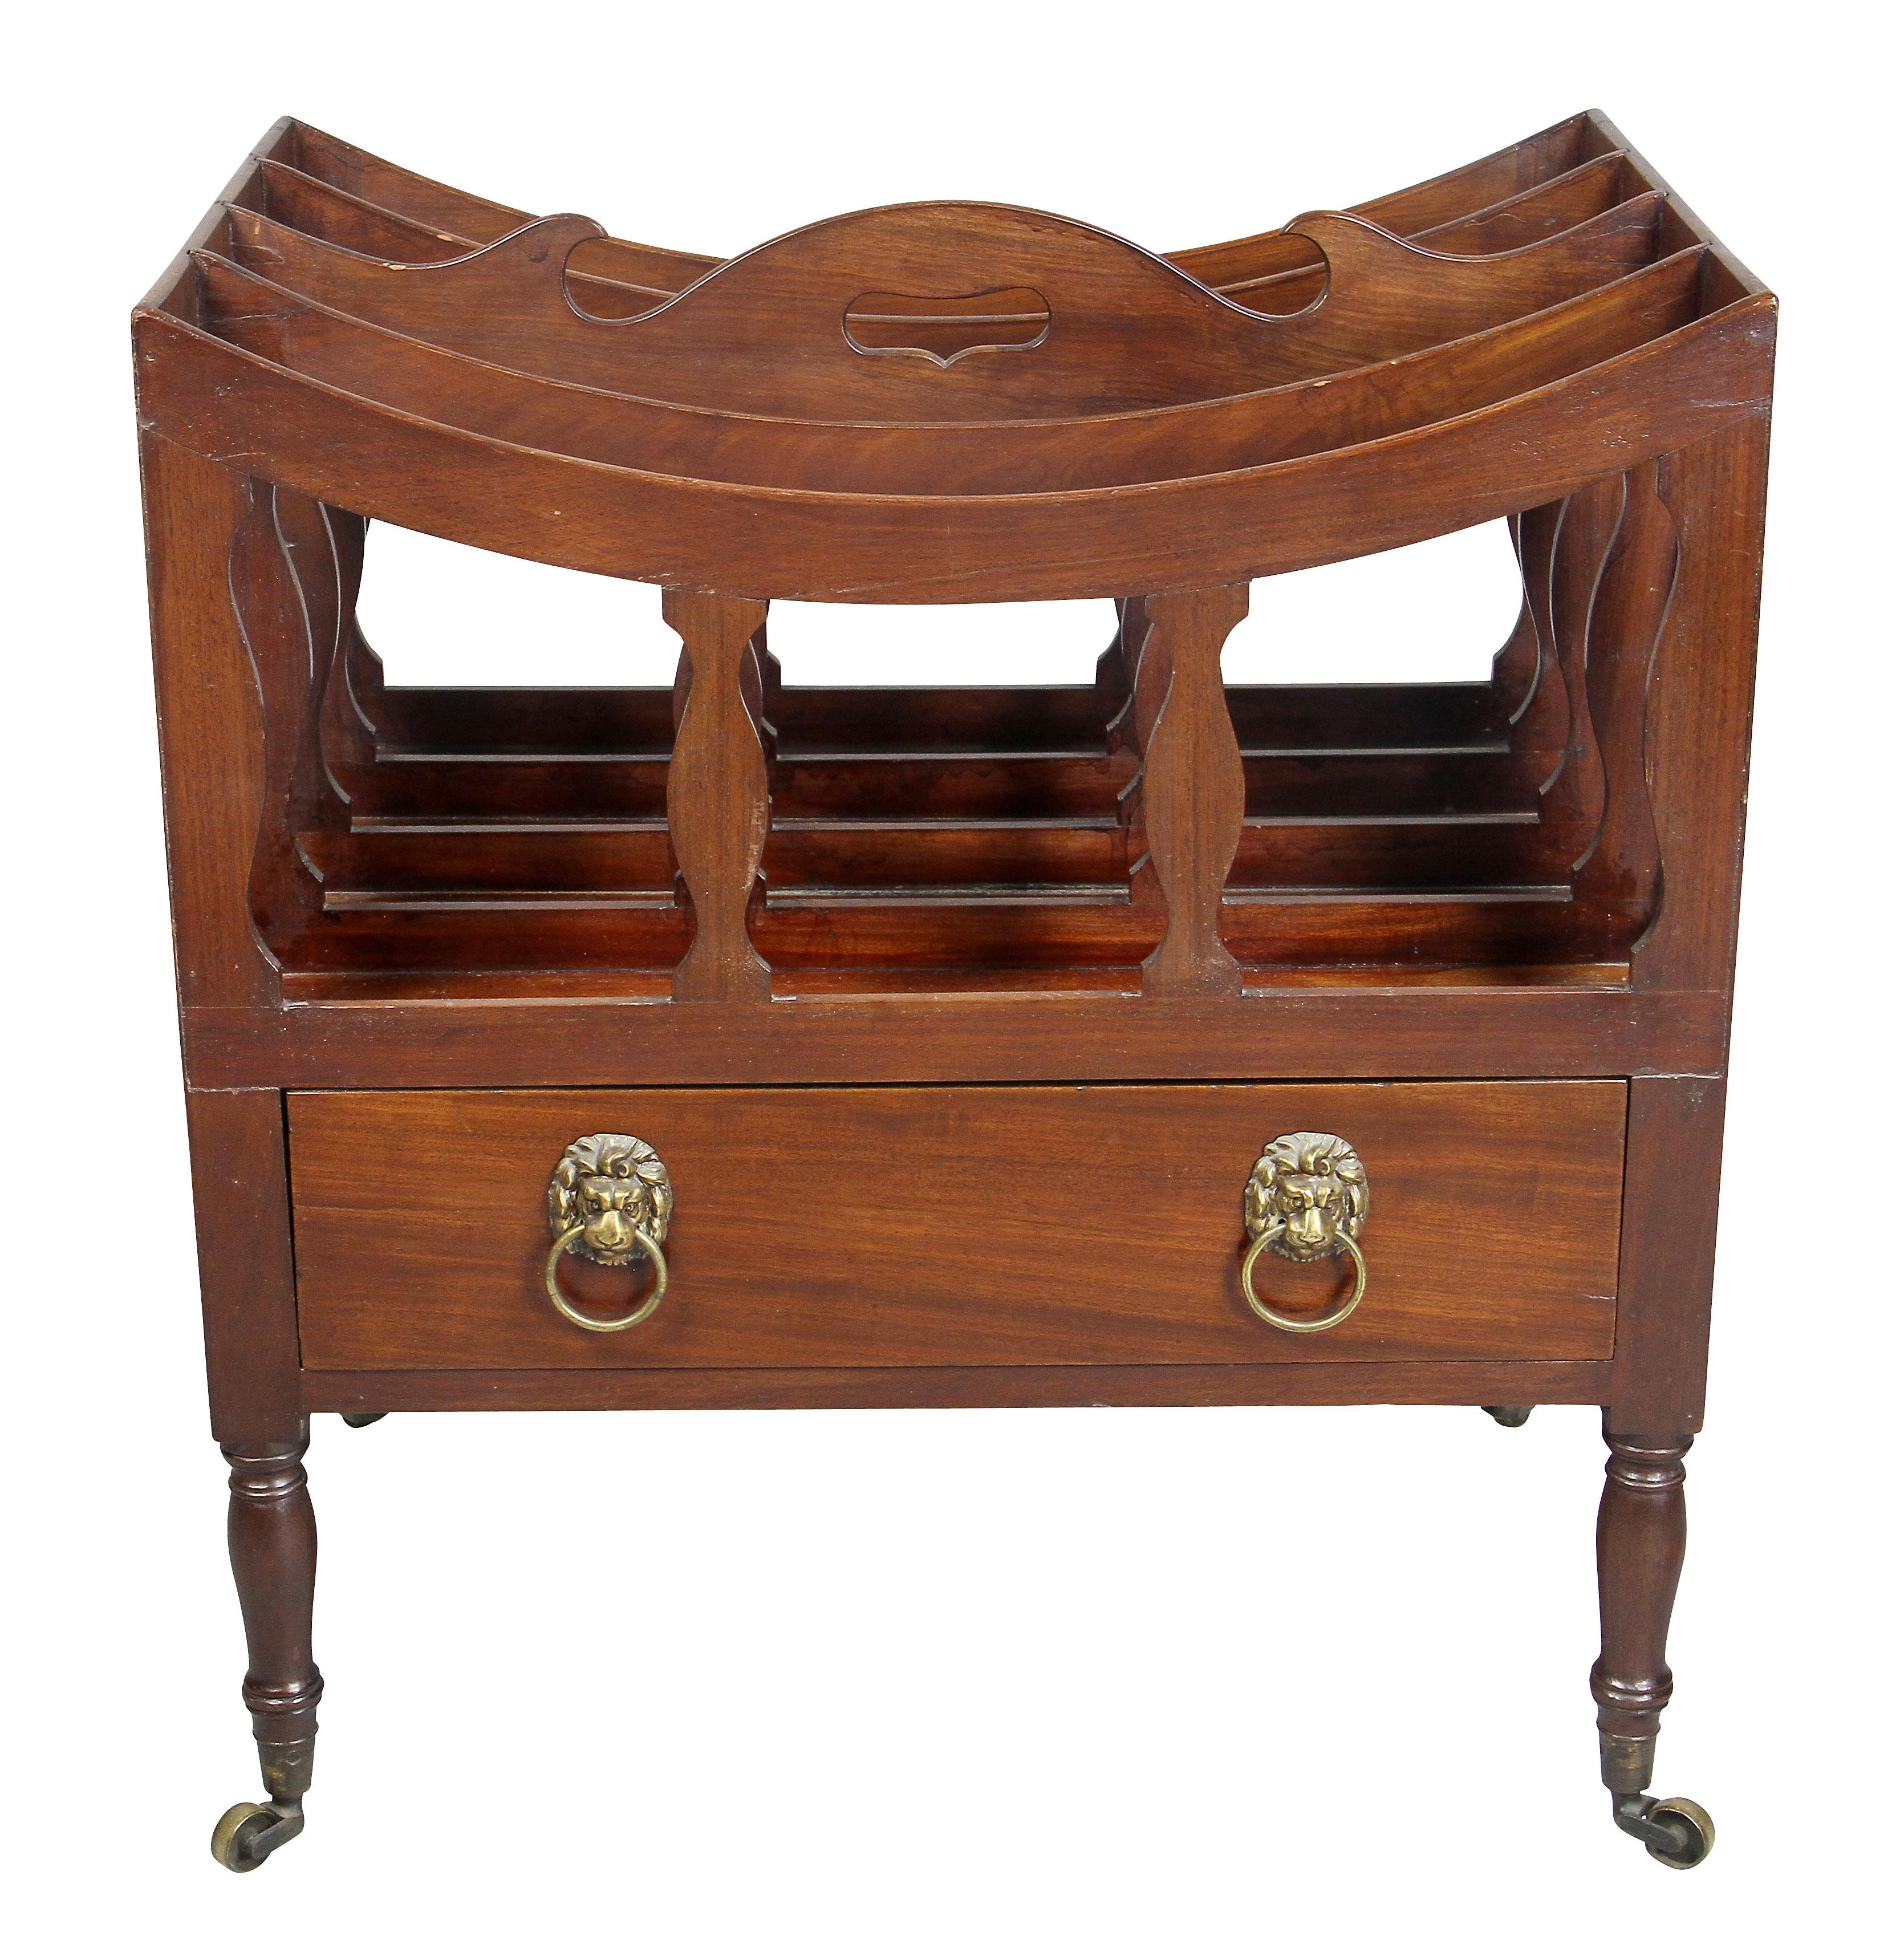 Typical form with single drawer with lions head handles, circular legs, casters.